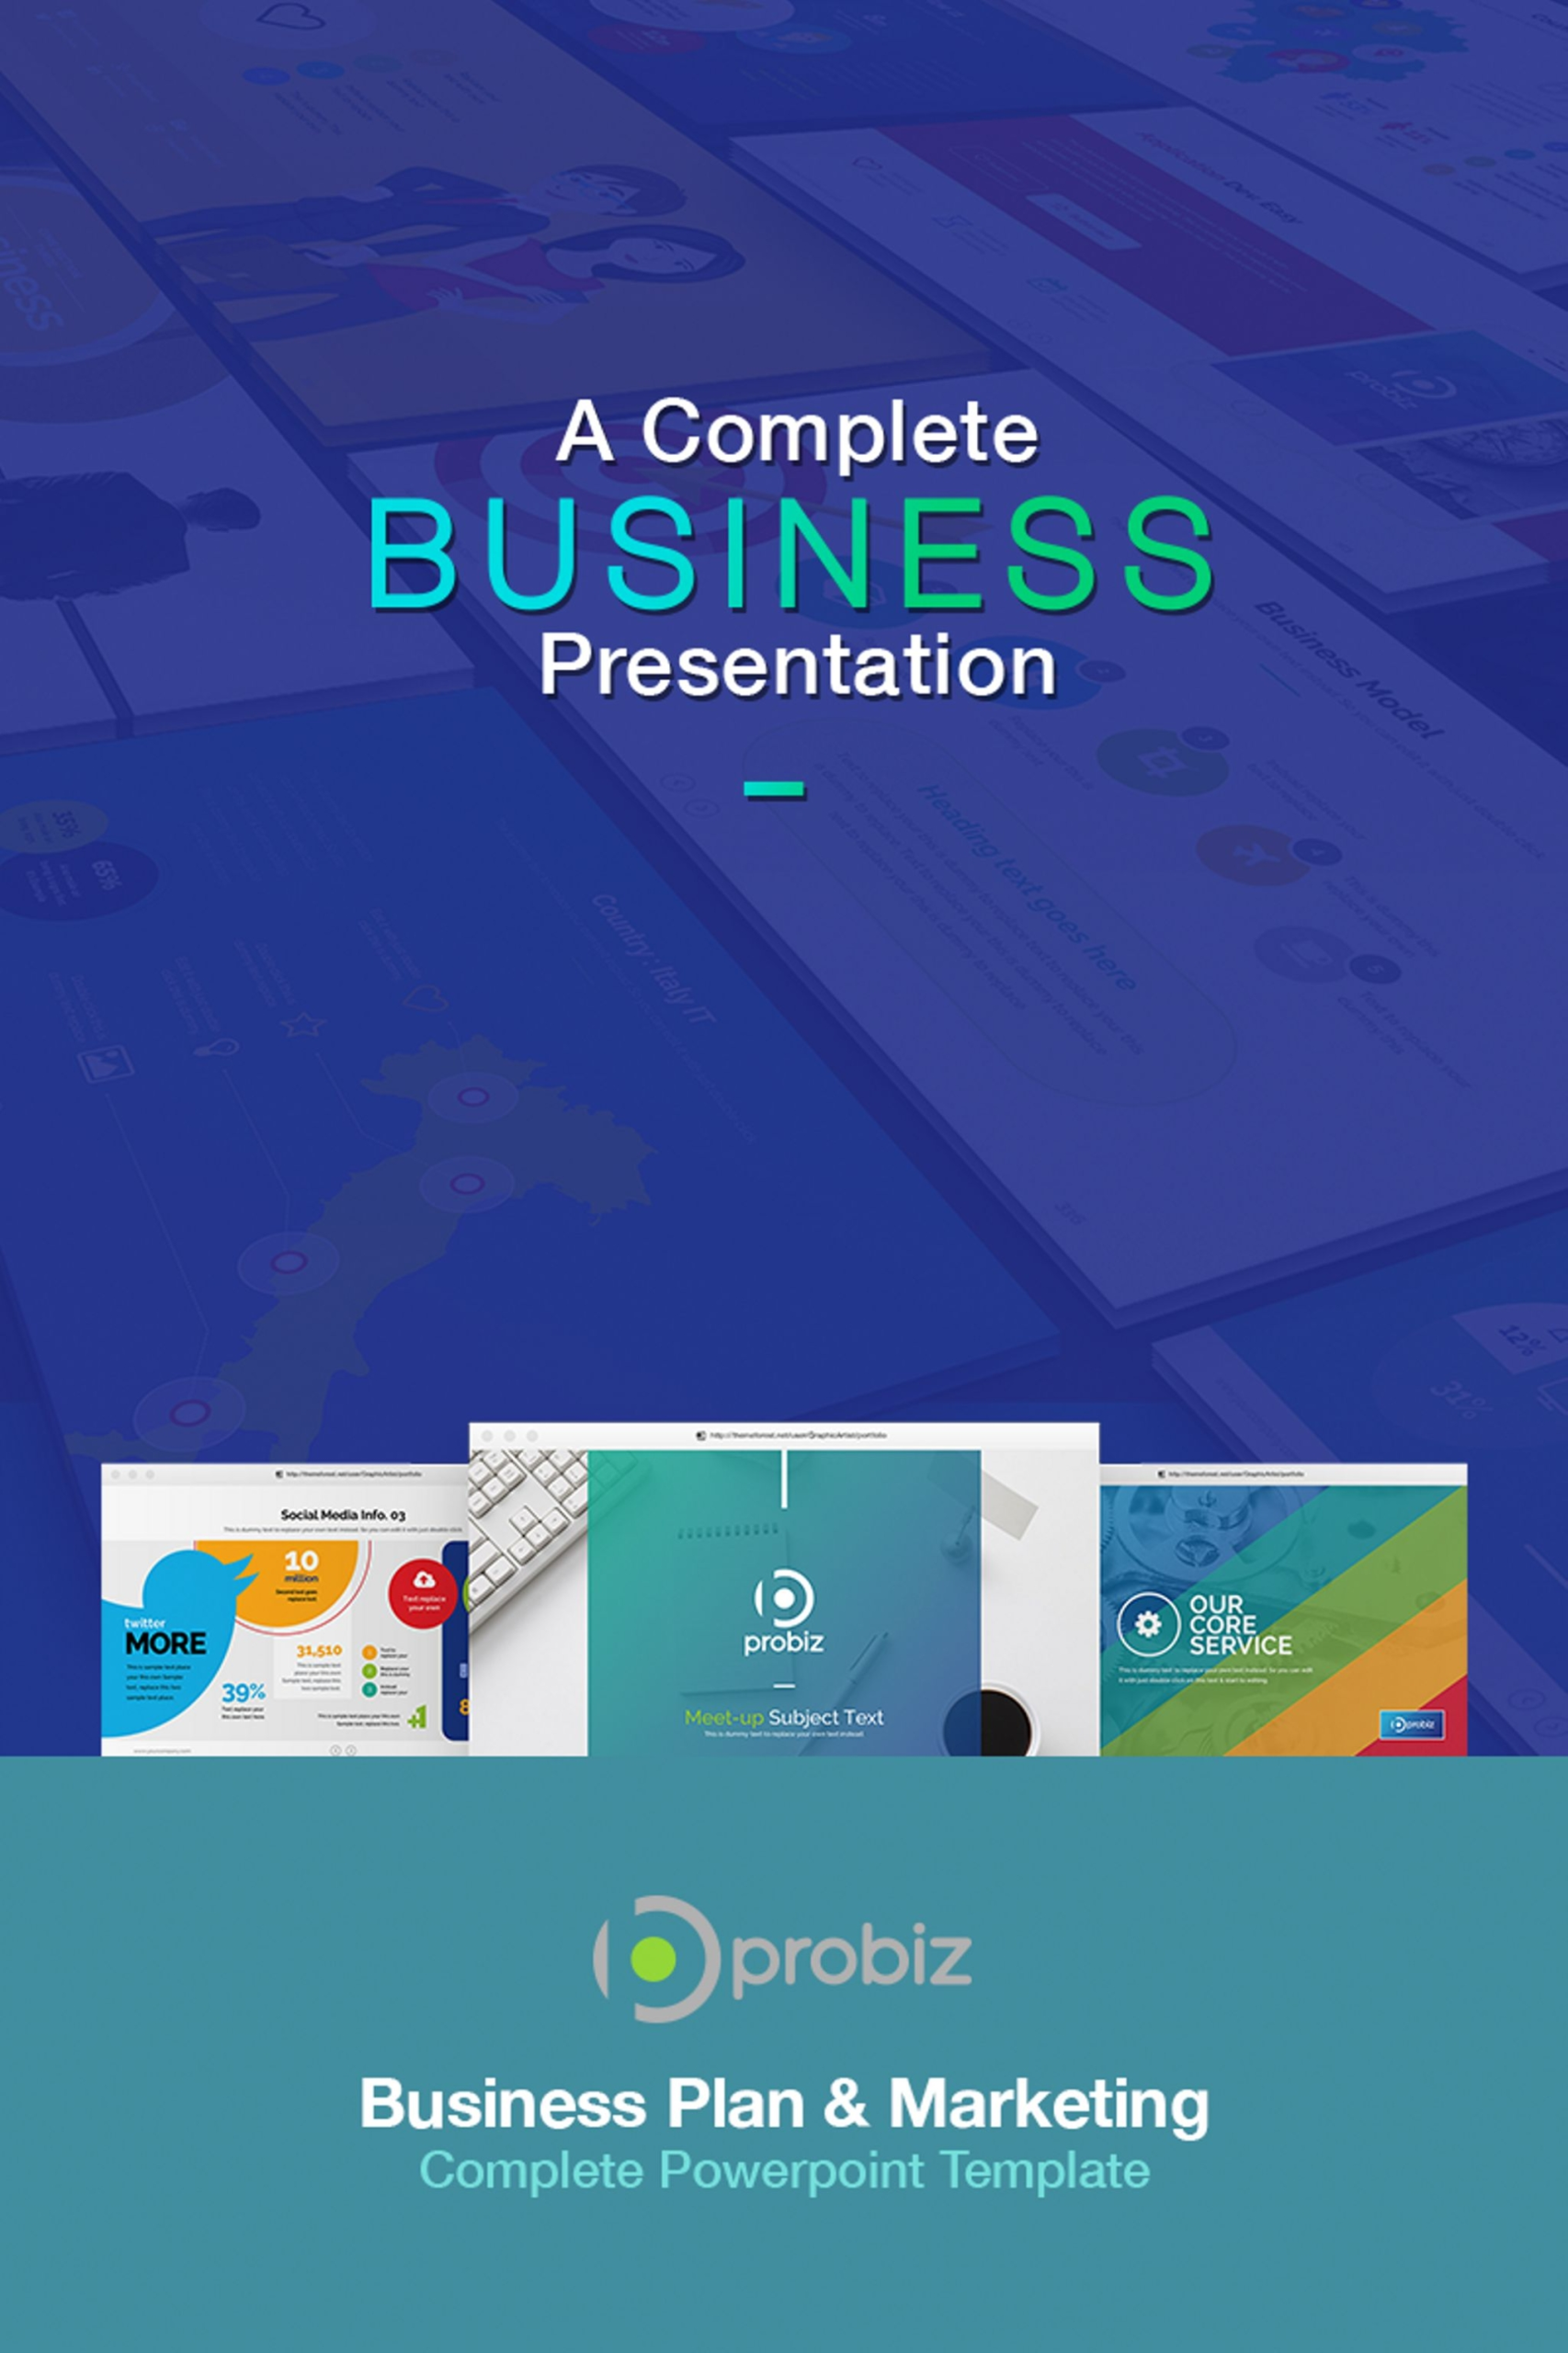 Business Plan & Marketing Powerpoint Template #67022 Pertaining To Ppt Presentation Templates For Business